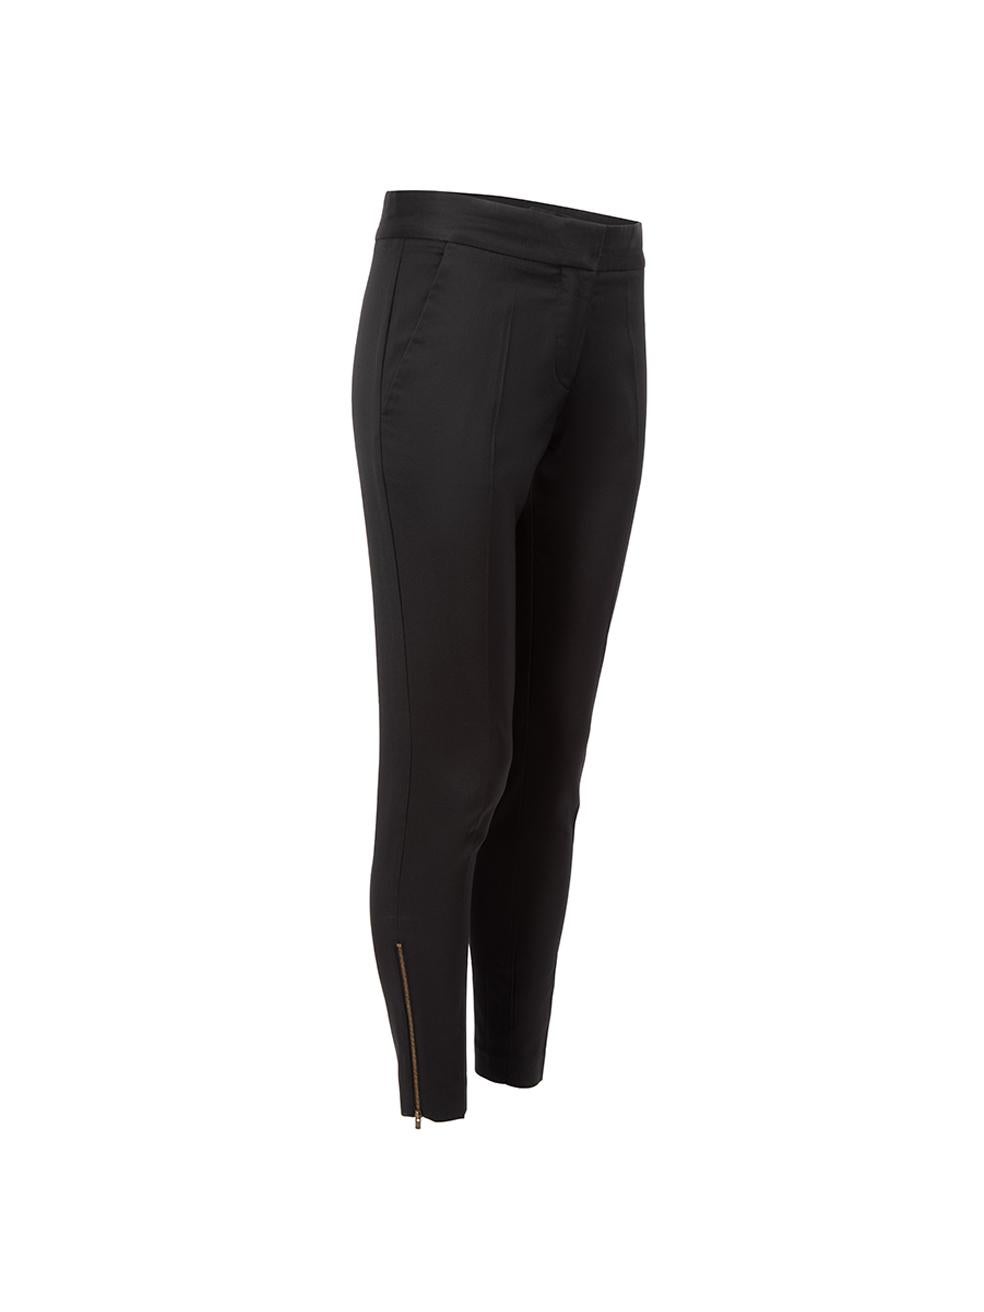 CONDITION is Very good. Hardly any visible wear to trousers other than a loose button at the front closure on this used Stella McCartney designer resale item. 
 
 Details
  Black
 Wool
 Slim fit trousers
 Low waisted
 Front zip closure with clasps